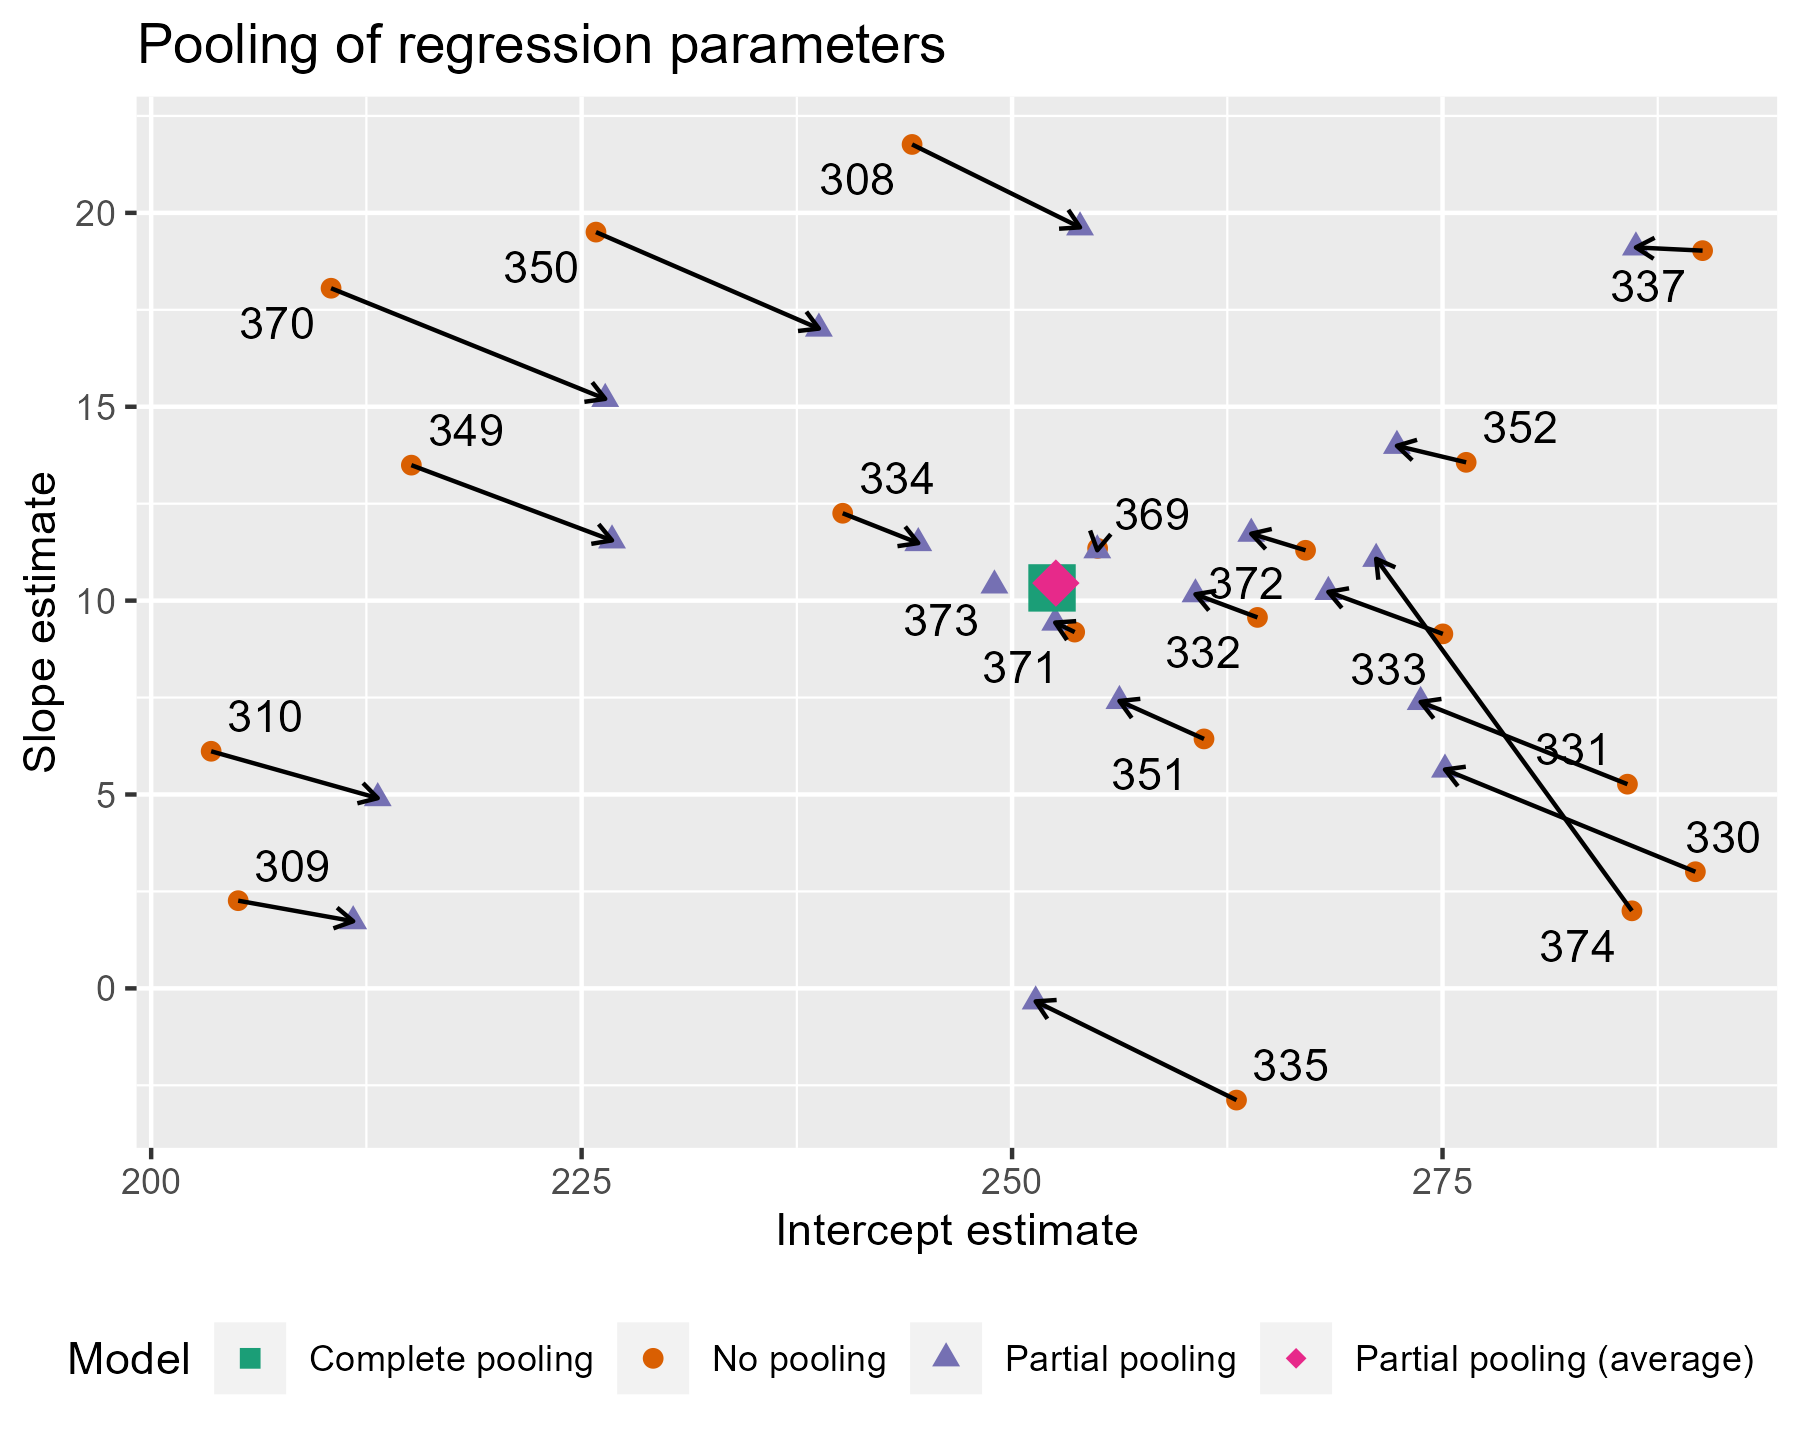 Scatterplot of the model parameters showing how estimates from the no pooling model are pulled towards the completely pooled value.